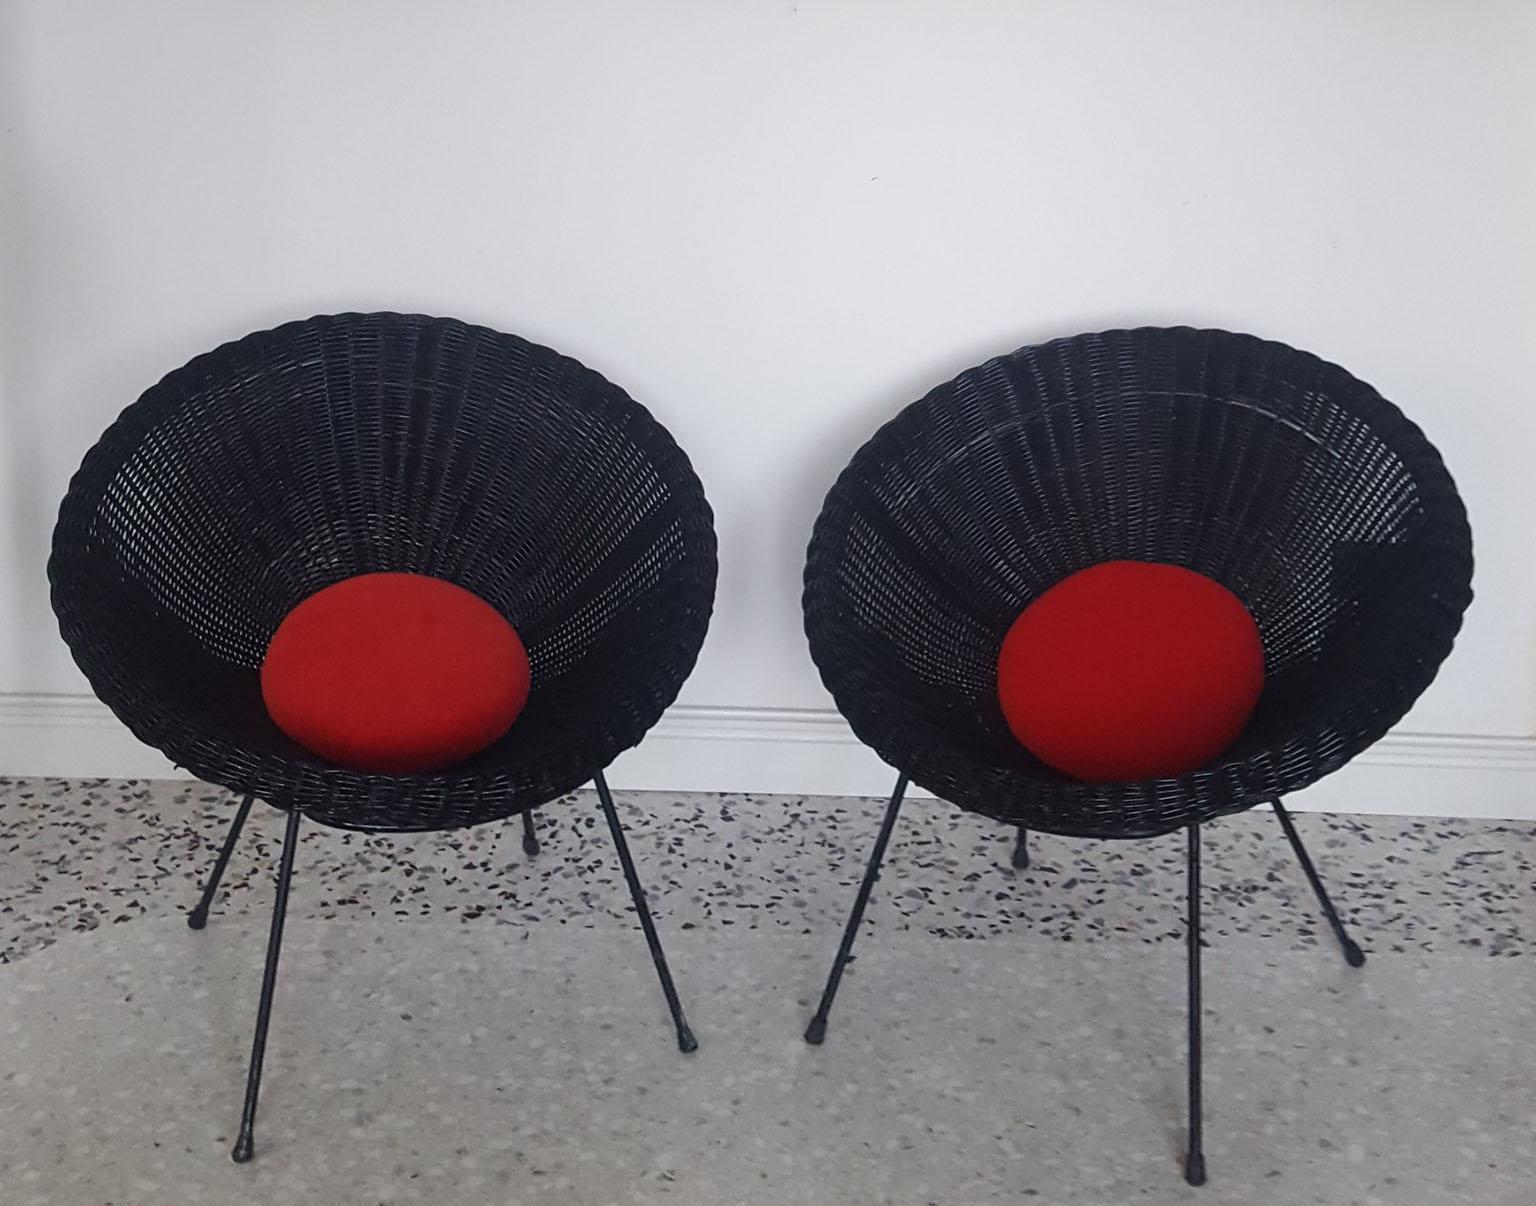 Mid-Century Modern Italian Black Wicker Round Armchairs, Made in Milano, 1950s For Sale 9